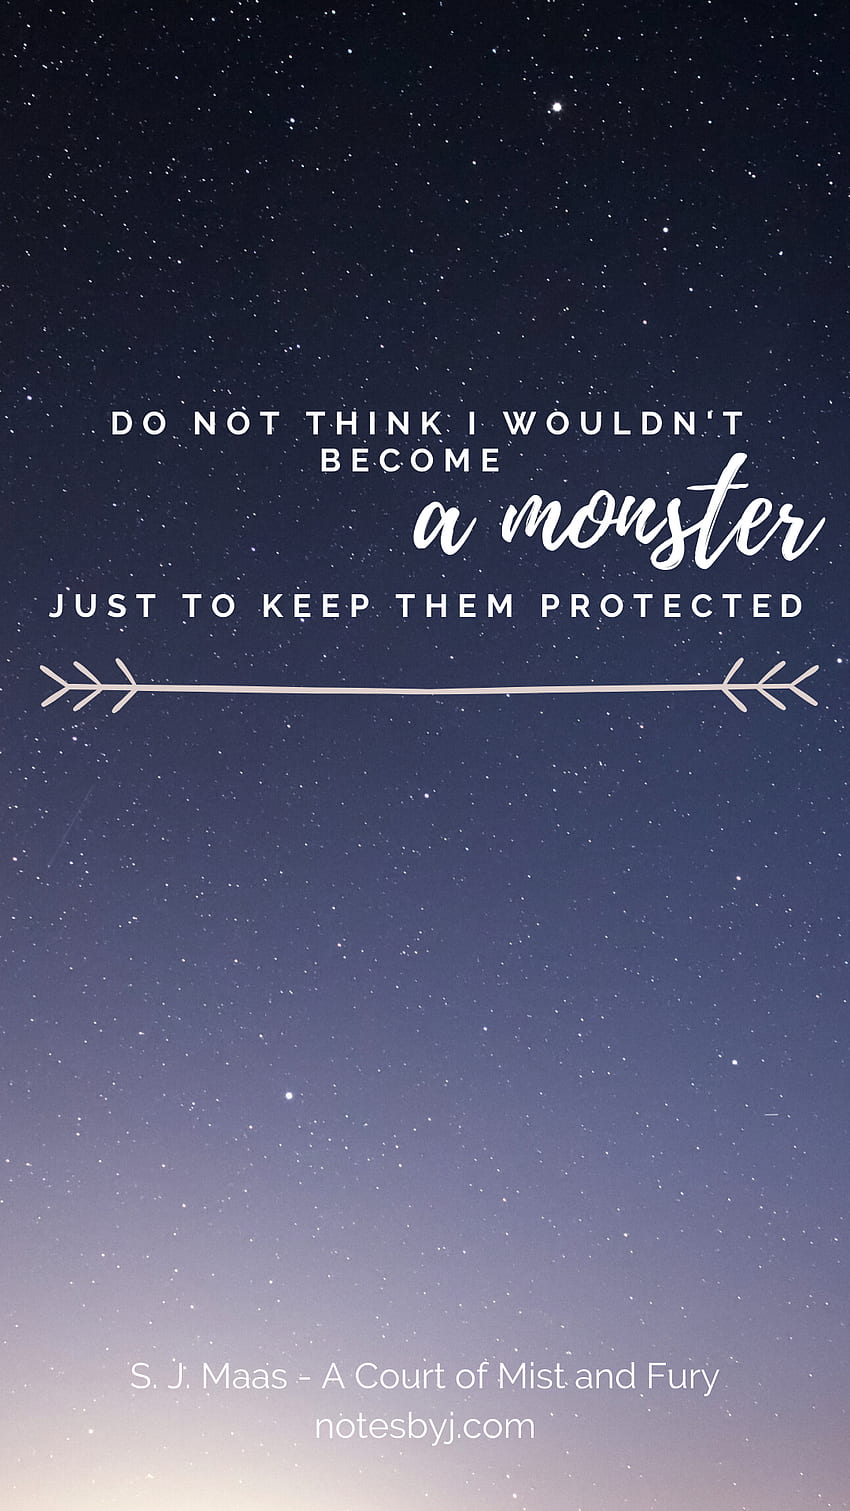 Phone Acotar Acomaf And Acowar Phone Best Quotes From Books